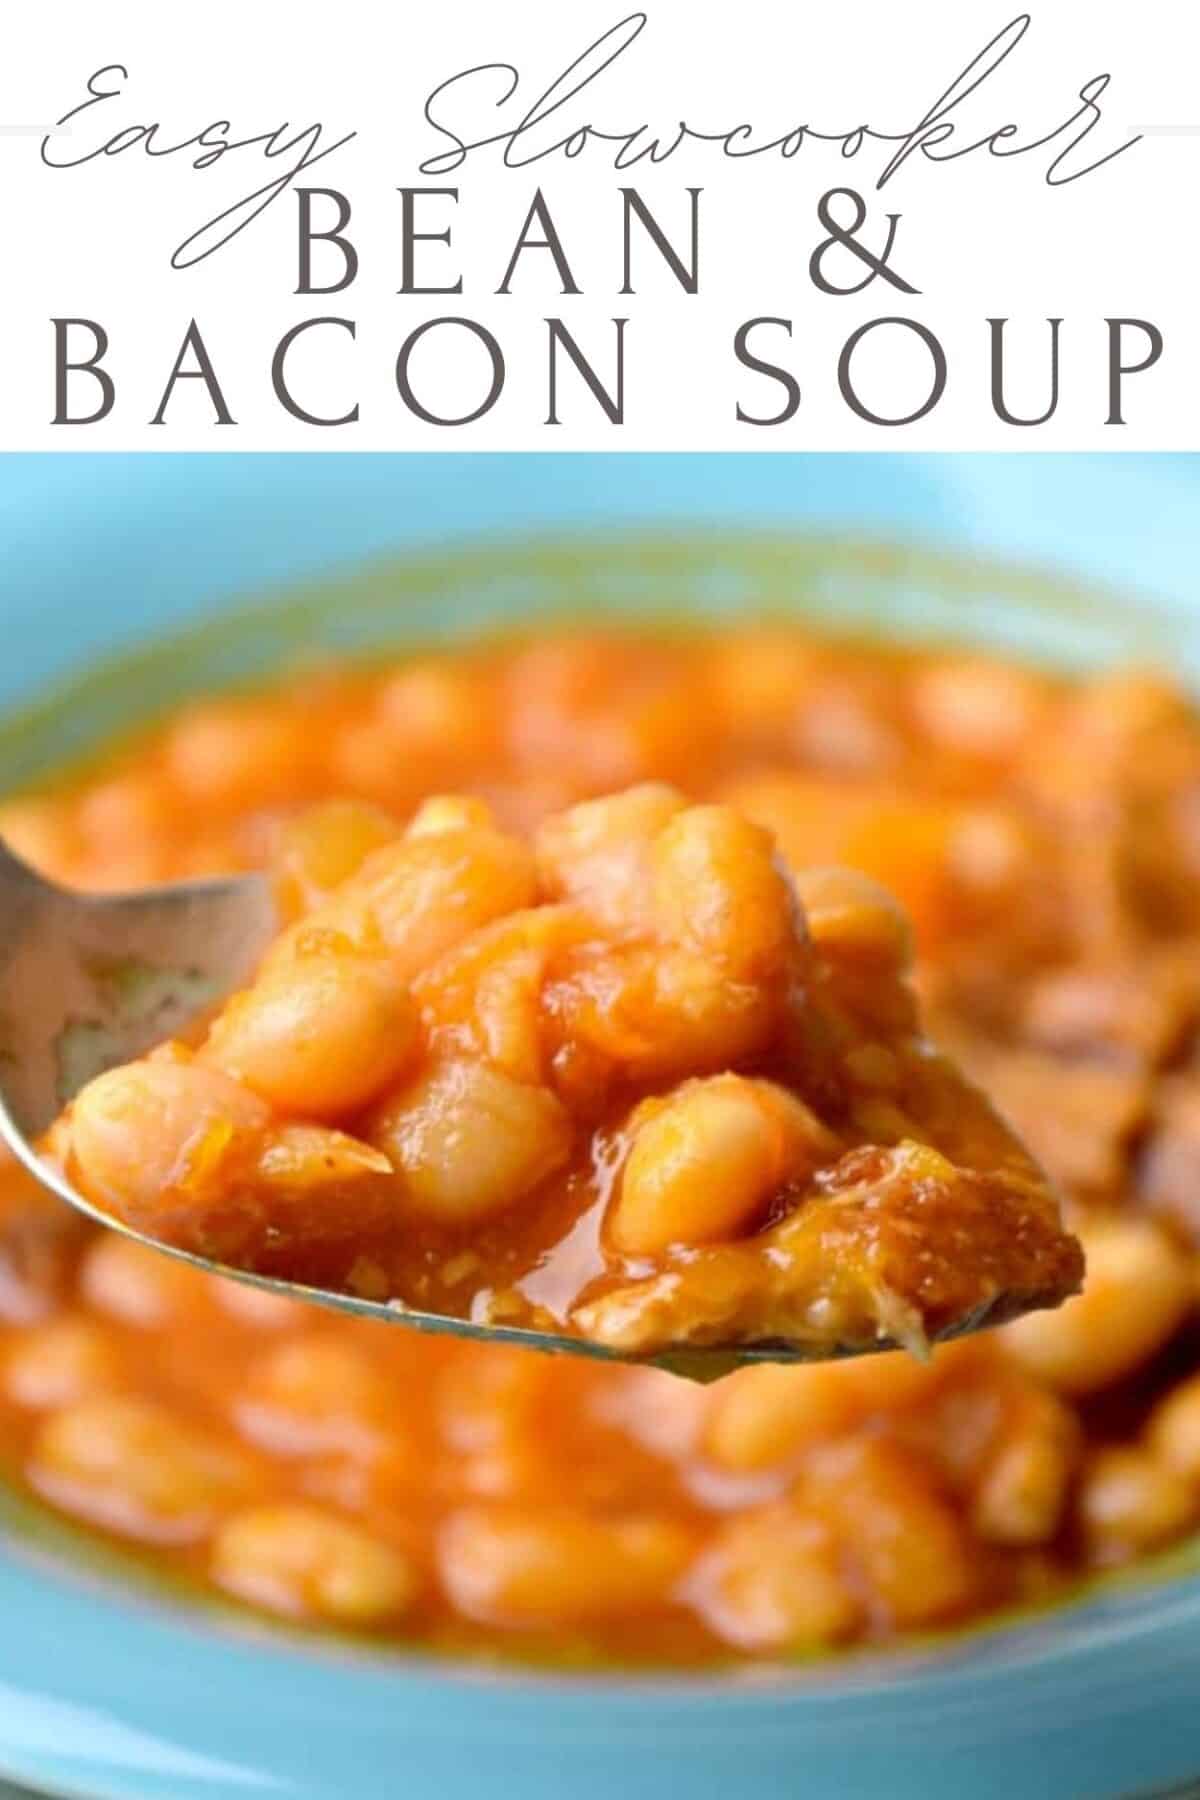 This Bean with Bacon Soup recipe is full of bacon flavor and perfectly hearty for a warm winter meal. You only need a few ingredients to make it which makes it affordable and easy.